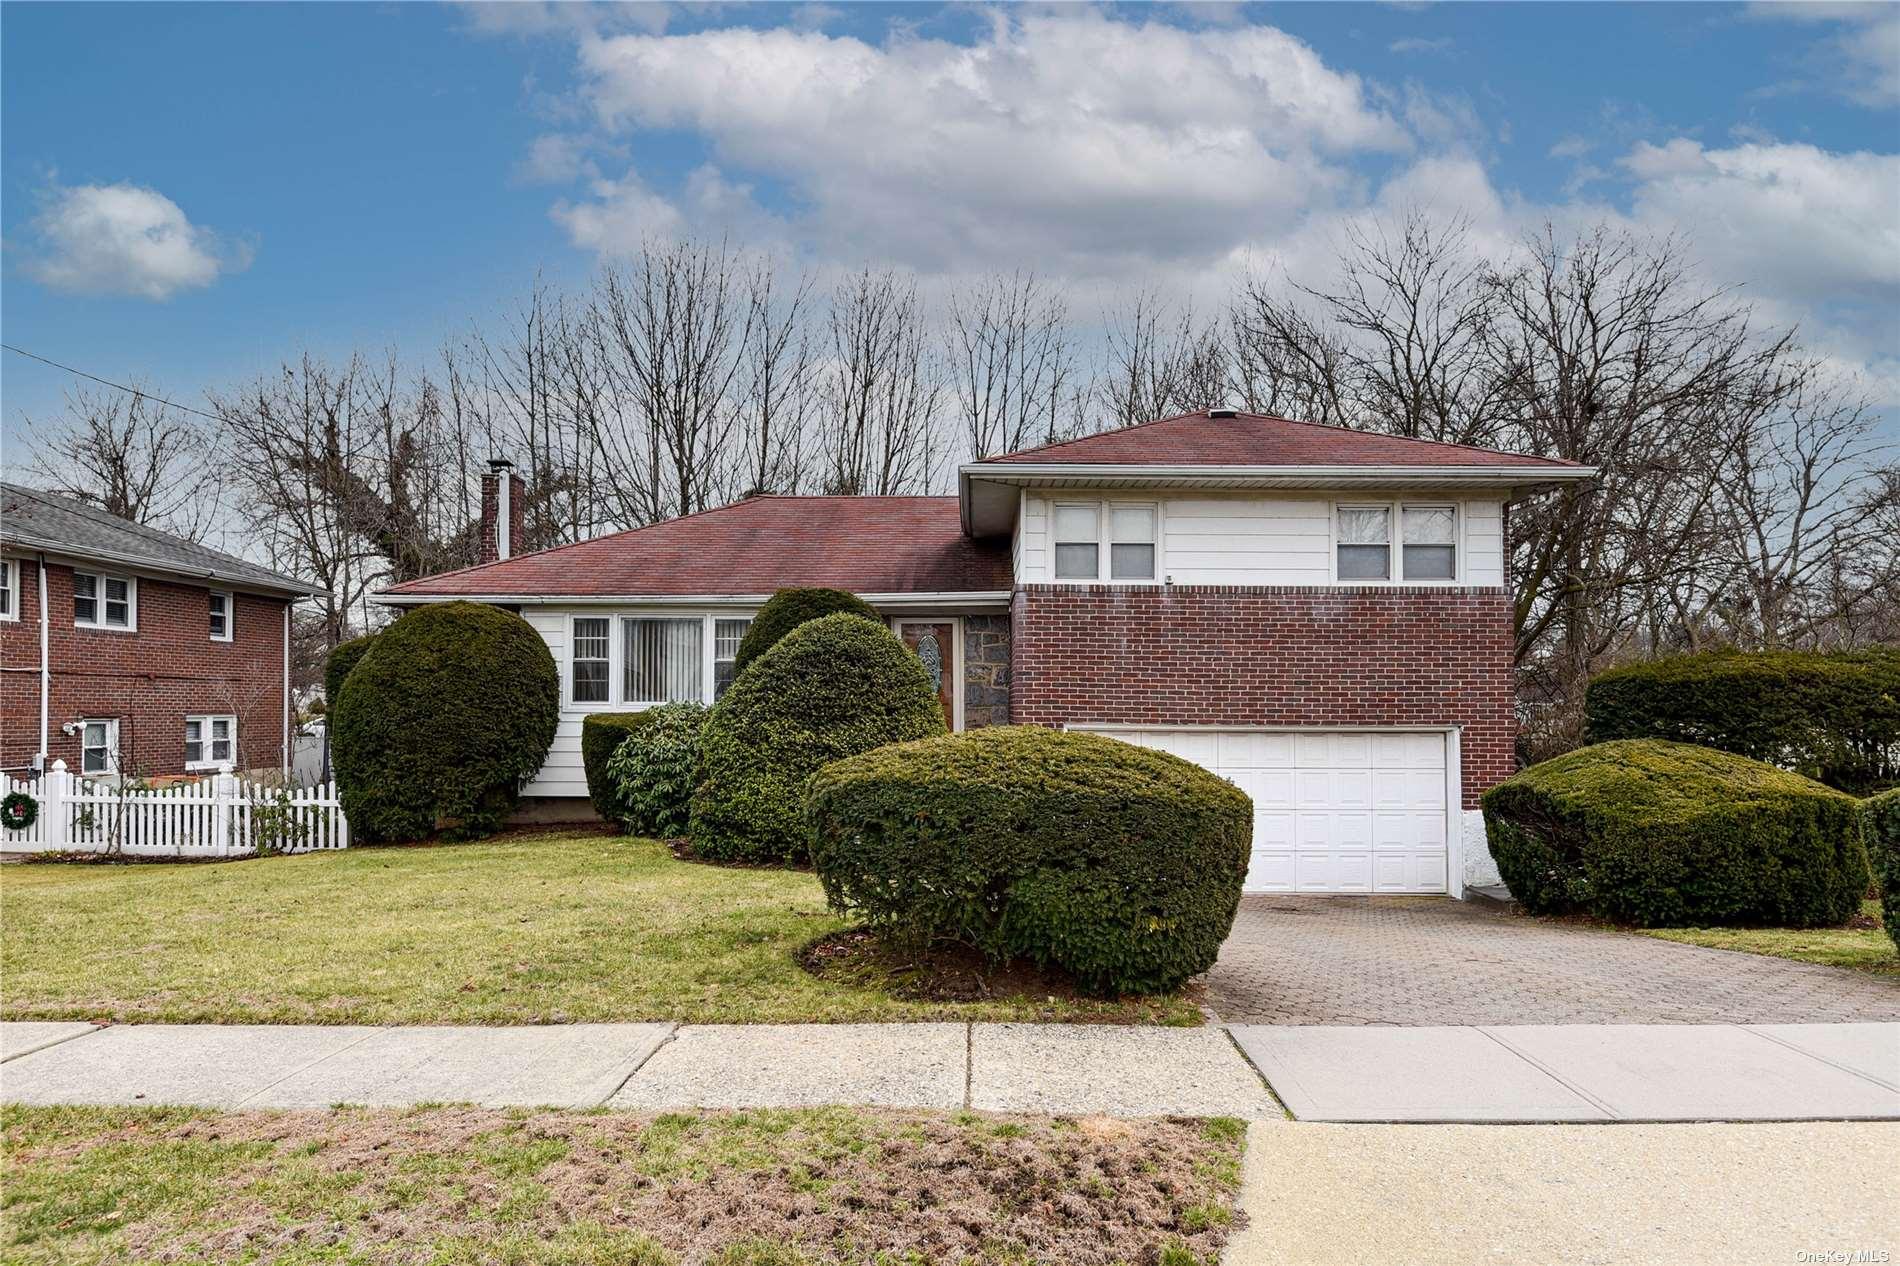 93 Bishop Place in Long Island, West Hempstead, NY 11552